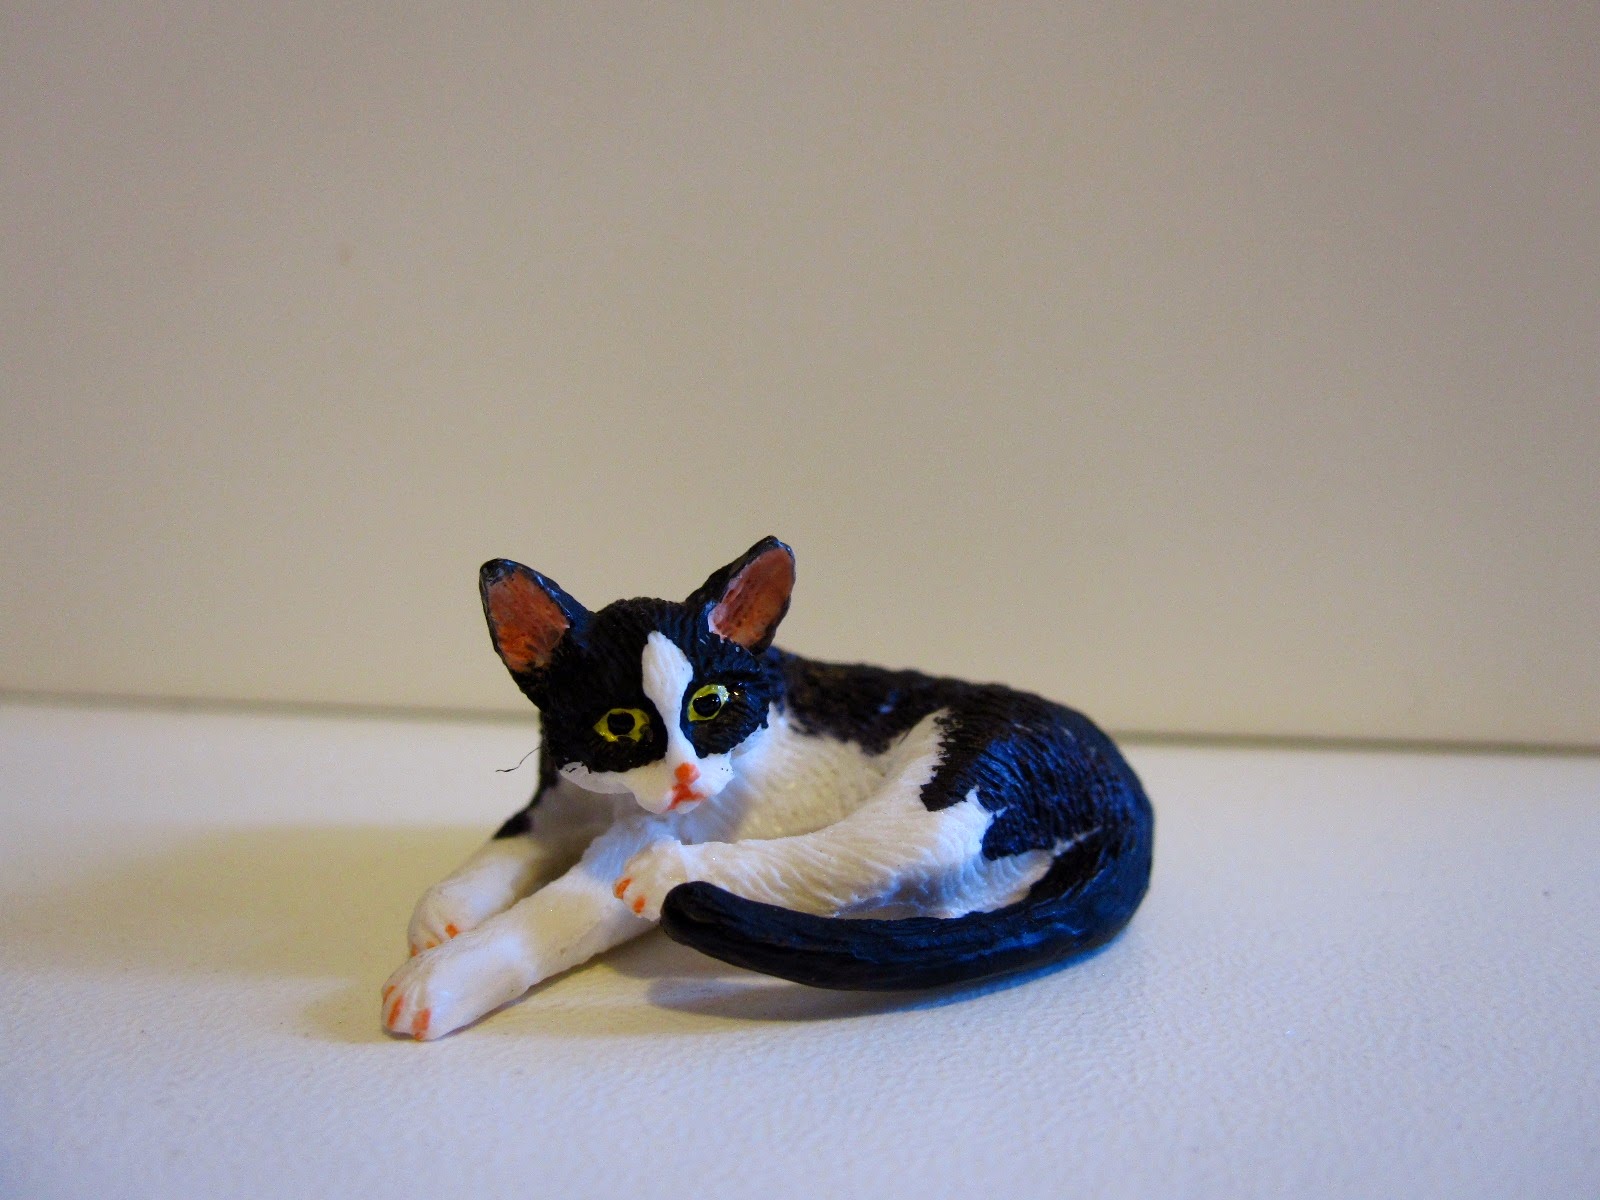 Dolls' house miniature black and white cat, lying down.